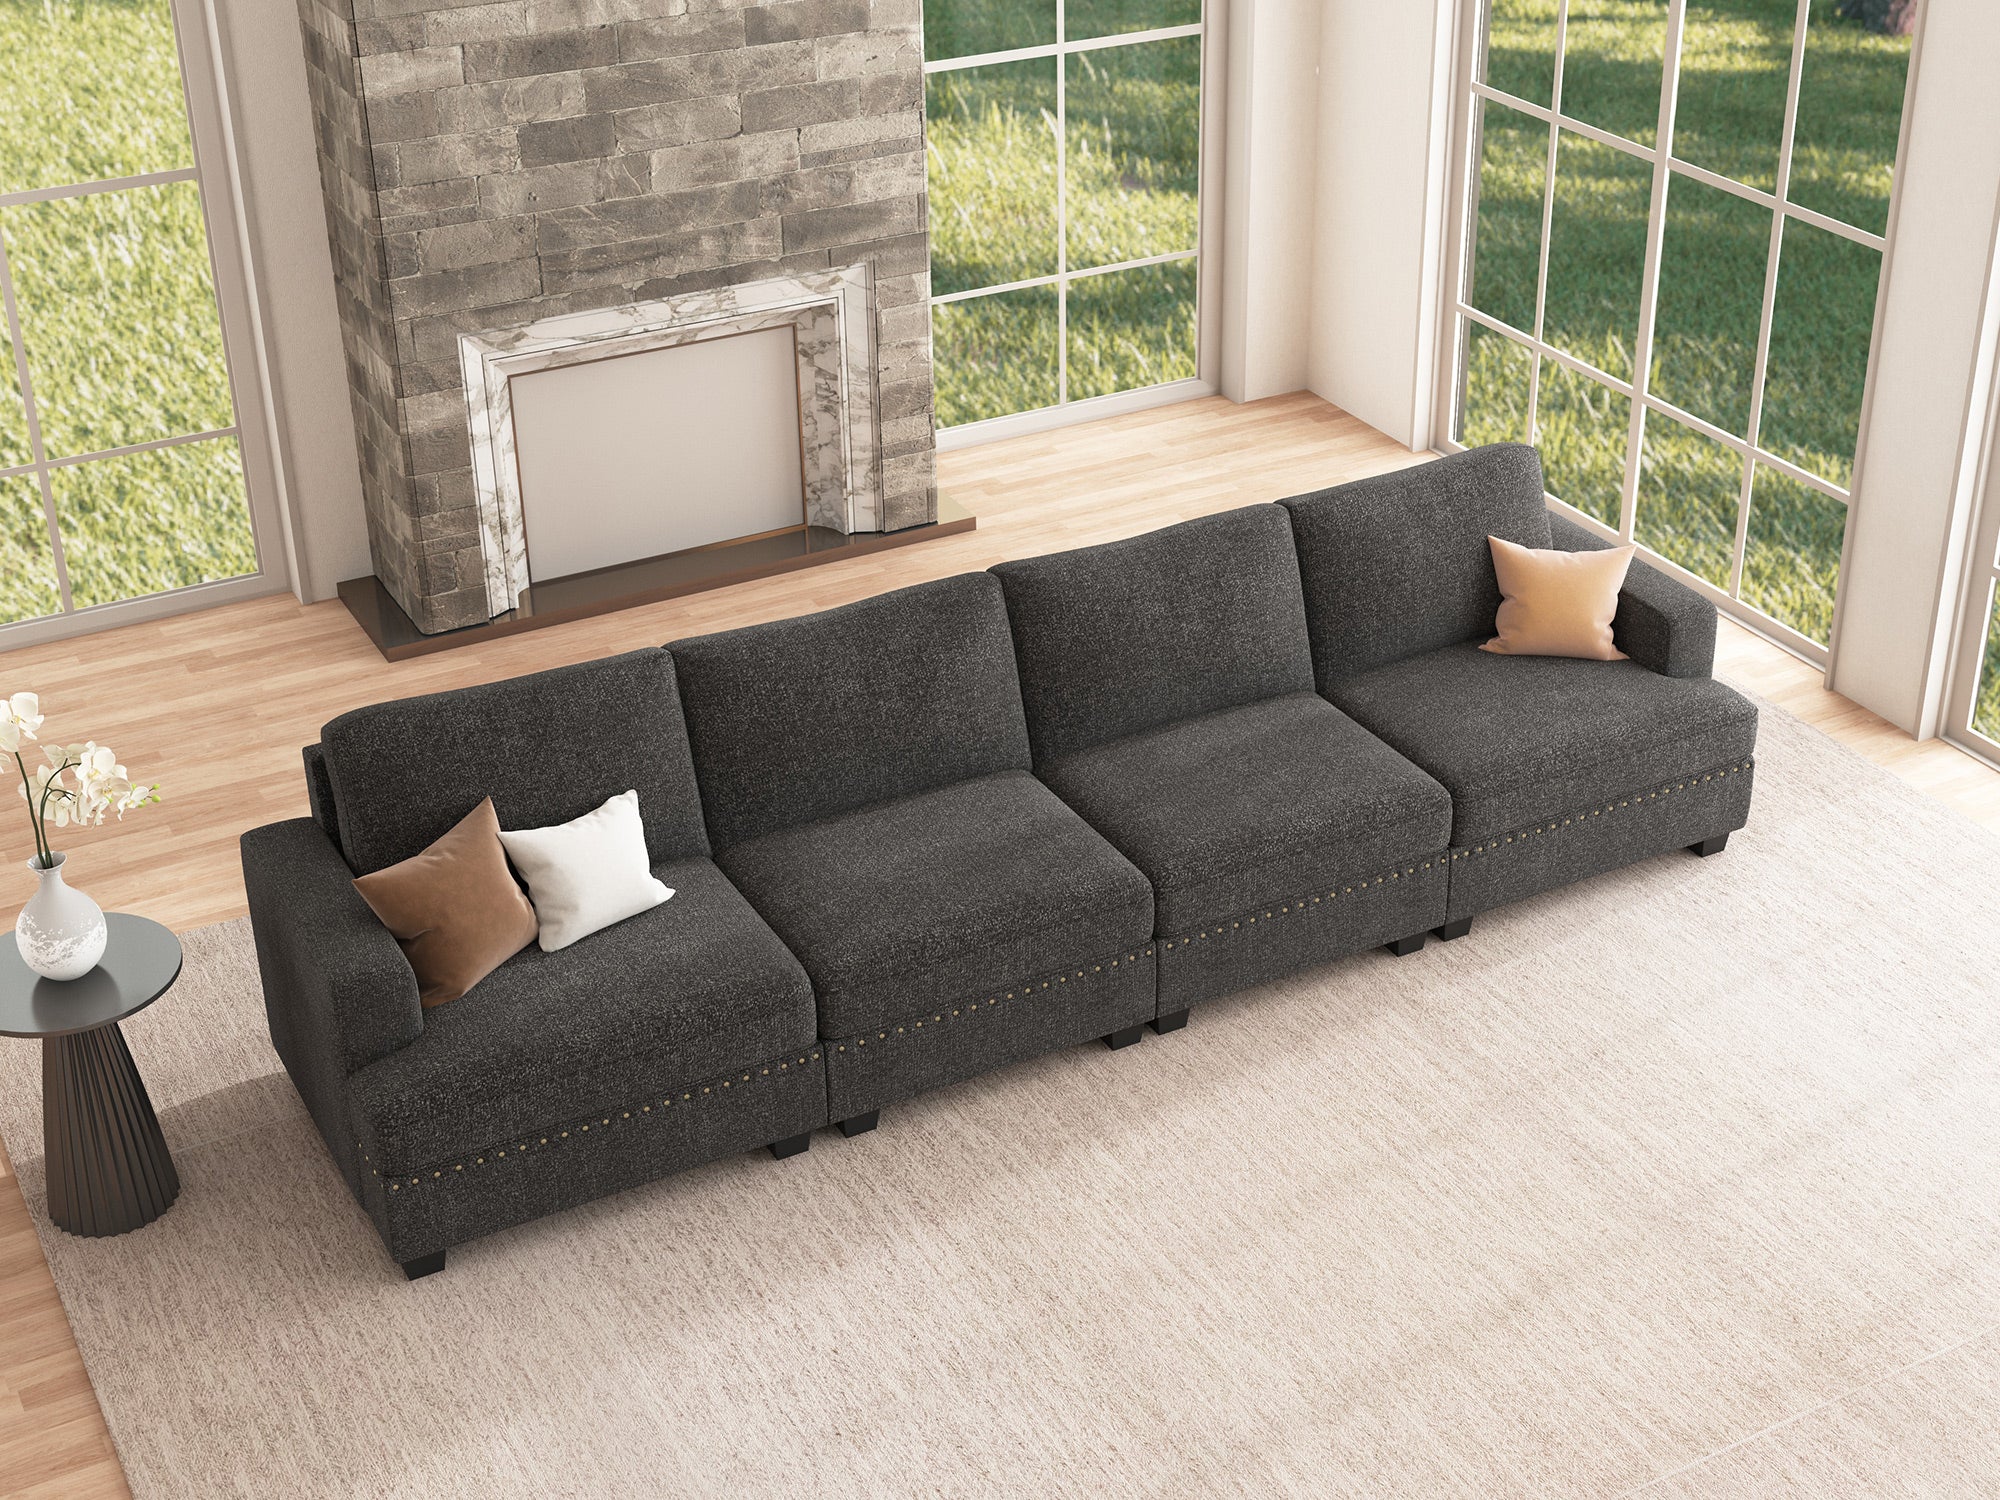 NOLANY 4-Seat Corner Modular Sofa Oversized Sectional Couch for Living Room #Color_Dark Grey